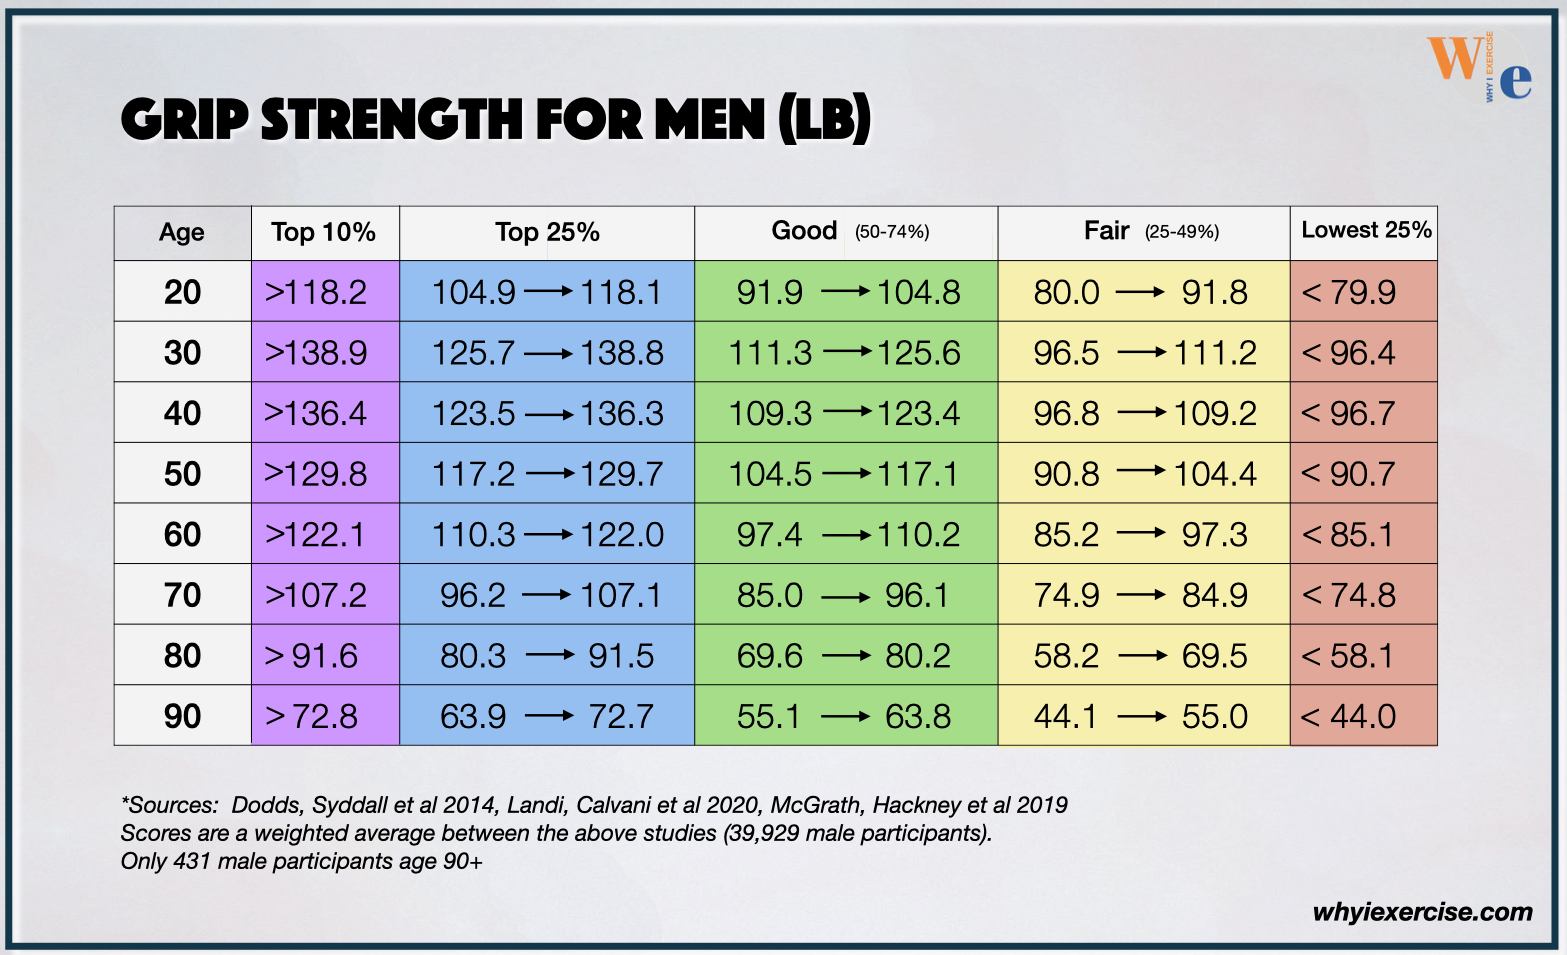 Age-group men's grip strength charts with percentile scores in pounds.